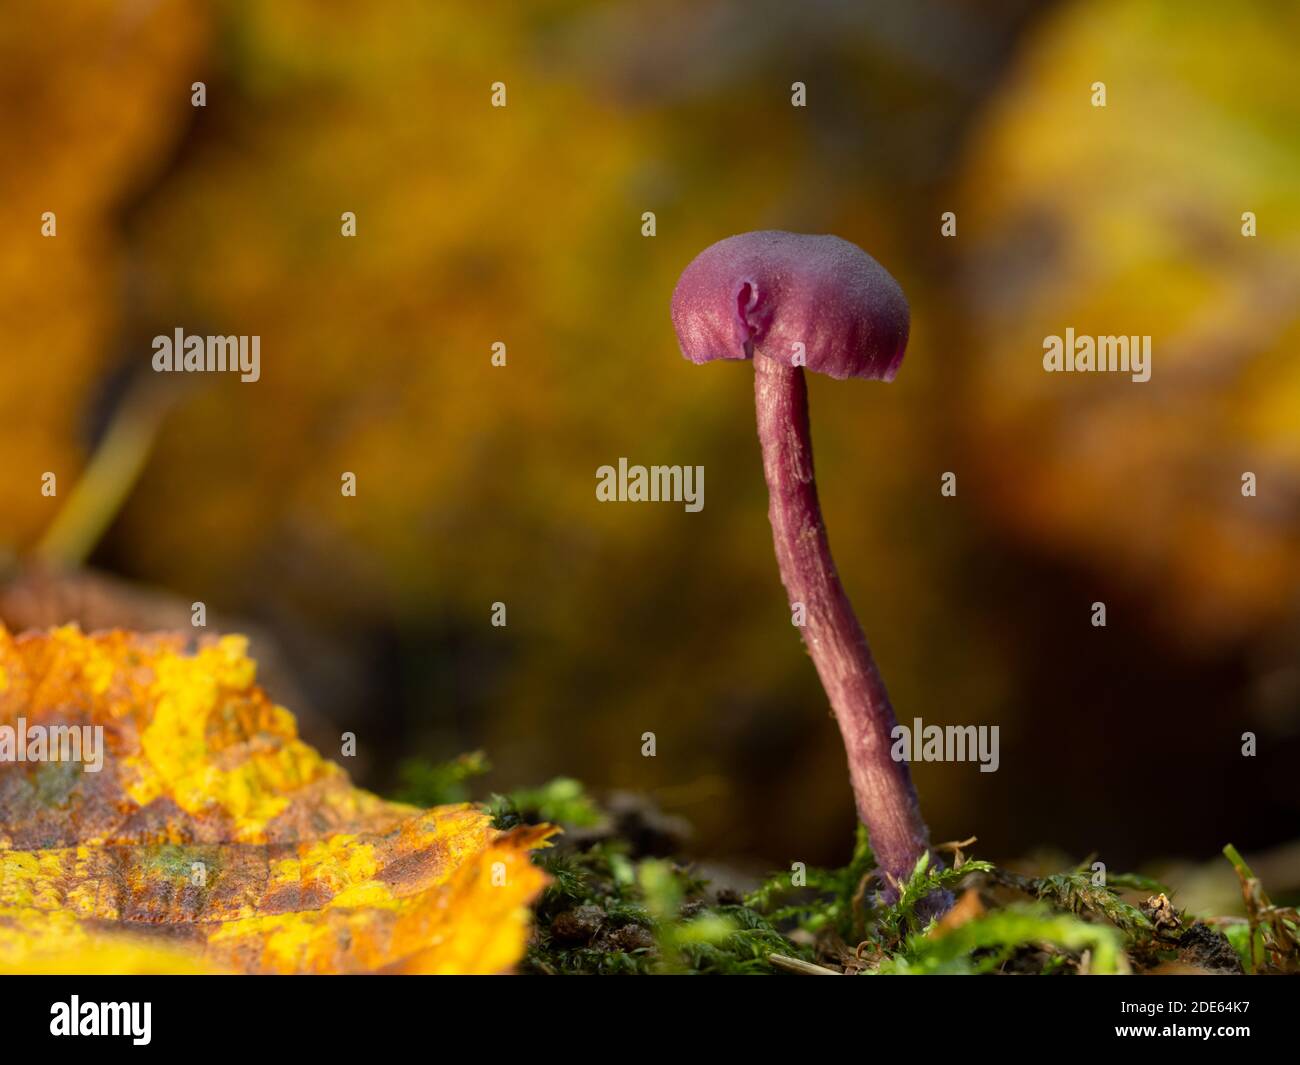 A close-up of a single Amethyst deceiver (Laccaria amethystina) mushroom. Taken in English woodland. Stock Photo